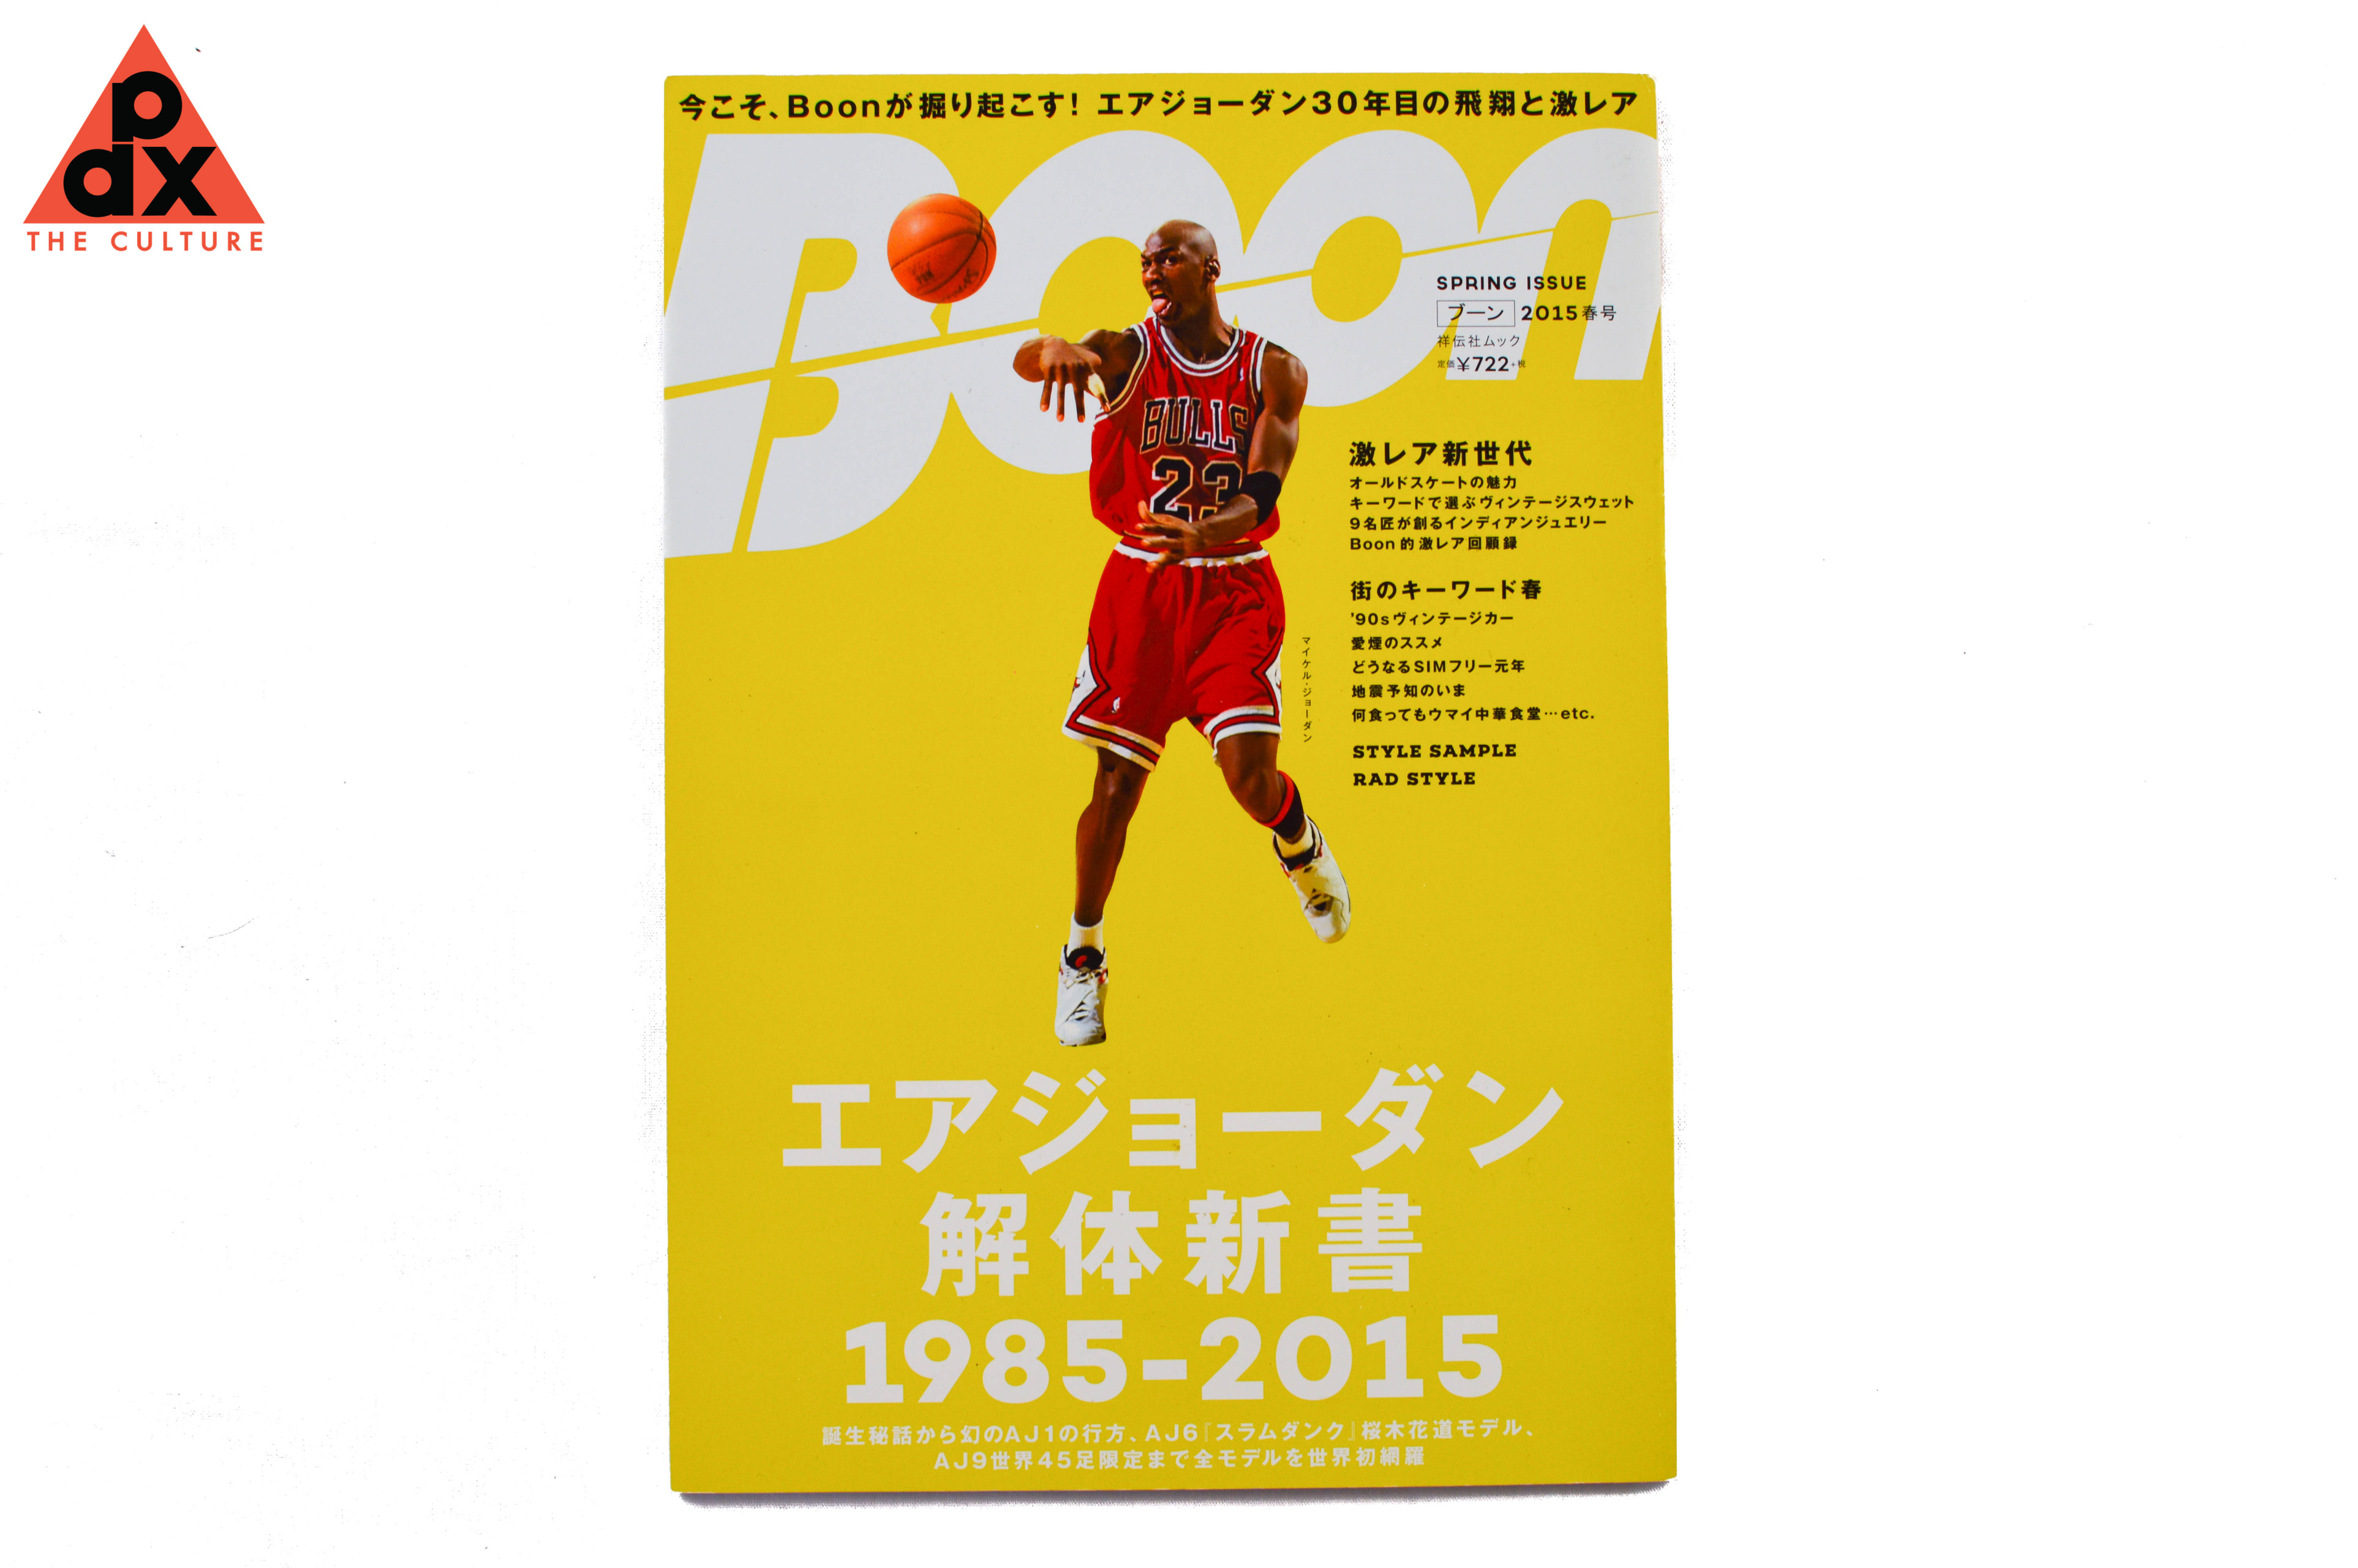 15 Boon Spring Issue Air Jordan Edition The Culture Pdx